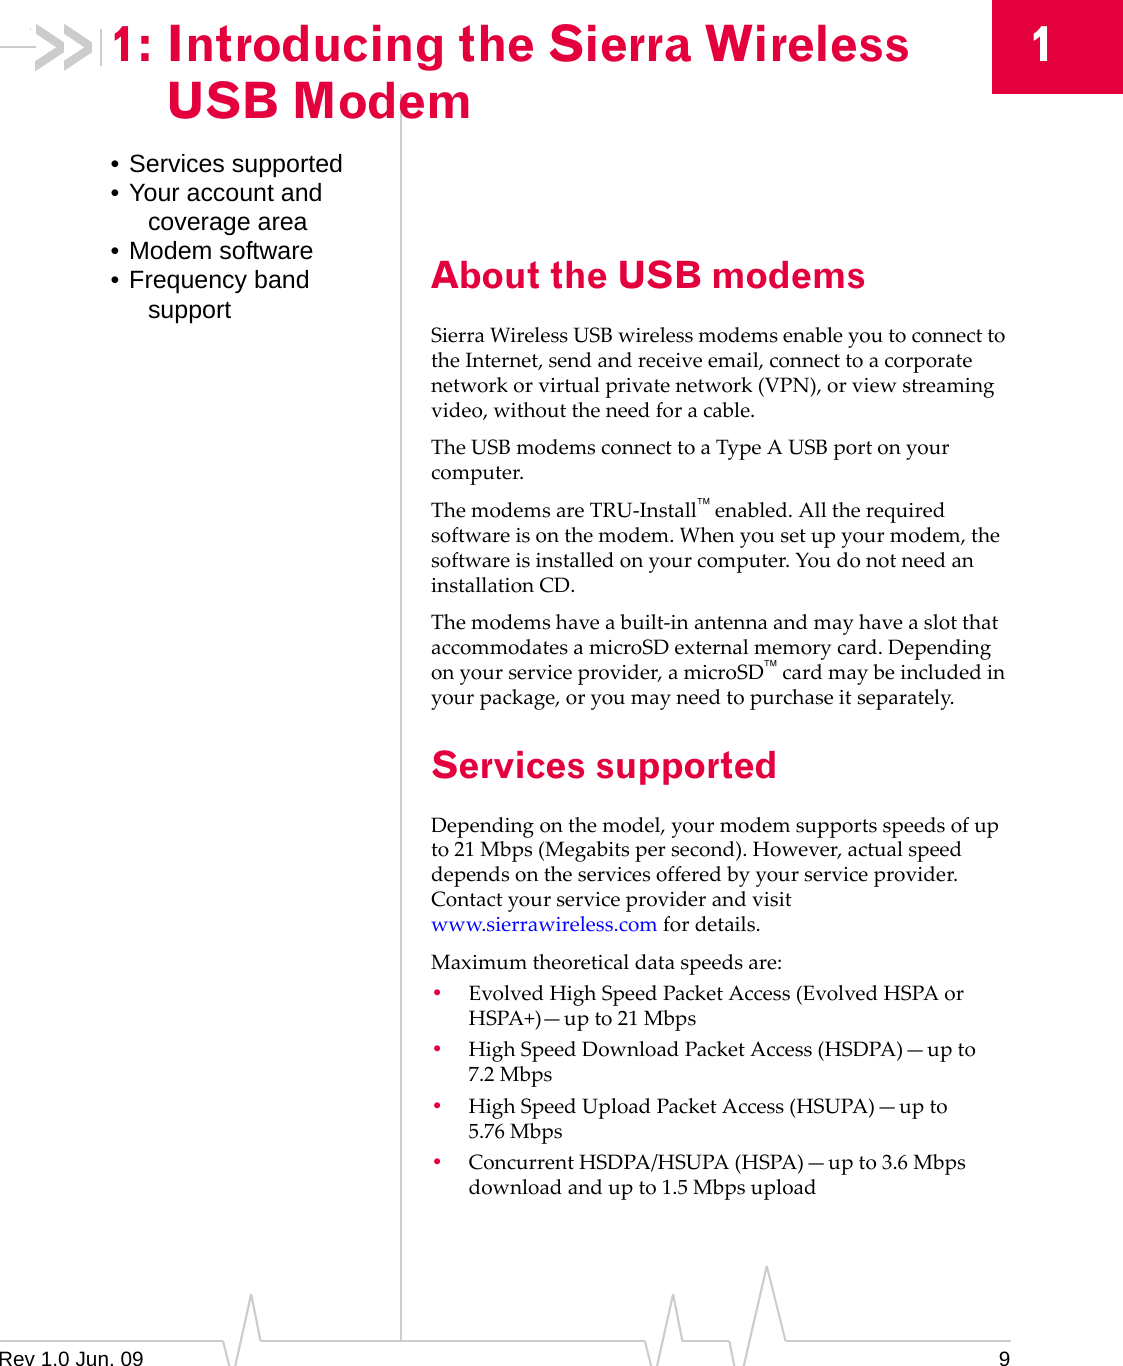 Rev 1.0 Jun. 09 911: Introducing the Sierra Wireless USB Modem• Services supported• Your account and coverage area• Modem software• Frequency band support About the USB modemsSierraWirelessUSBwirelessmodemsenableyoutoconnecttotheInternet,sendandreceiveemail,connecttoacorporatenetworkorvirtualprivatenetwork(VPN),orviewstreamingvideo,withouttheneedforacable.TheUSBmodemsconnecttoaTypeAUSBportonyourcomputer.ThemodemsareTRU‐Installenabled.Alltherequiredsoftwareisonthemodem.Whenyousetupyourmodem,thesoftwareisinstalledonyourcomputer.YoudonotneedaninstallationCD.Themodemshaveabuilt‐inantennaandmayhaveaslotthataccommodatesamicroSDexternalmemorycard.Dependingonyourserviceprovider,amicroSDcardmaybeincludedinyourpackage,oryoumayneedtopurchaseitseparately.Services supportedDependingonthemodel,yourmodemsupportsspeedsofupto21Mbps(Megabitspersecond).However,actualspeeddependsontheservicesofferedbyyourserviceprovider.Contactyourserviceproviderandvisitwww.sierrawireless.comfordetails.Maximumtheoreticaldataspeedsare:•EvolvedHighSpeedPacketAccess(EvolvedHSPAorHSPA+)—upto21 Mbps•HighSpeedDownloadPacketAccess(HSDPA)—upto7.2 Mbps•HighSpeedUploadPacketAccess(HSUPA)—upto5.76 Mbps•ConcurrentHSDPA/HSUPA(HSPA)—upto3.6Mbpsdownloadandupto1.5Mbpsupload